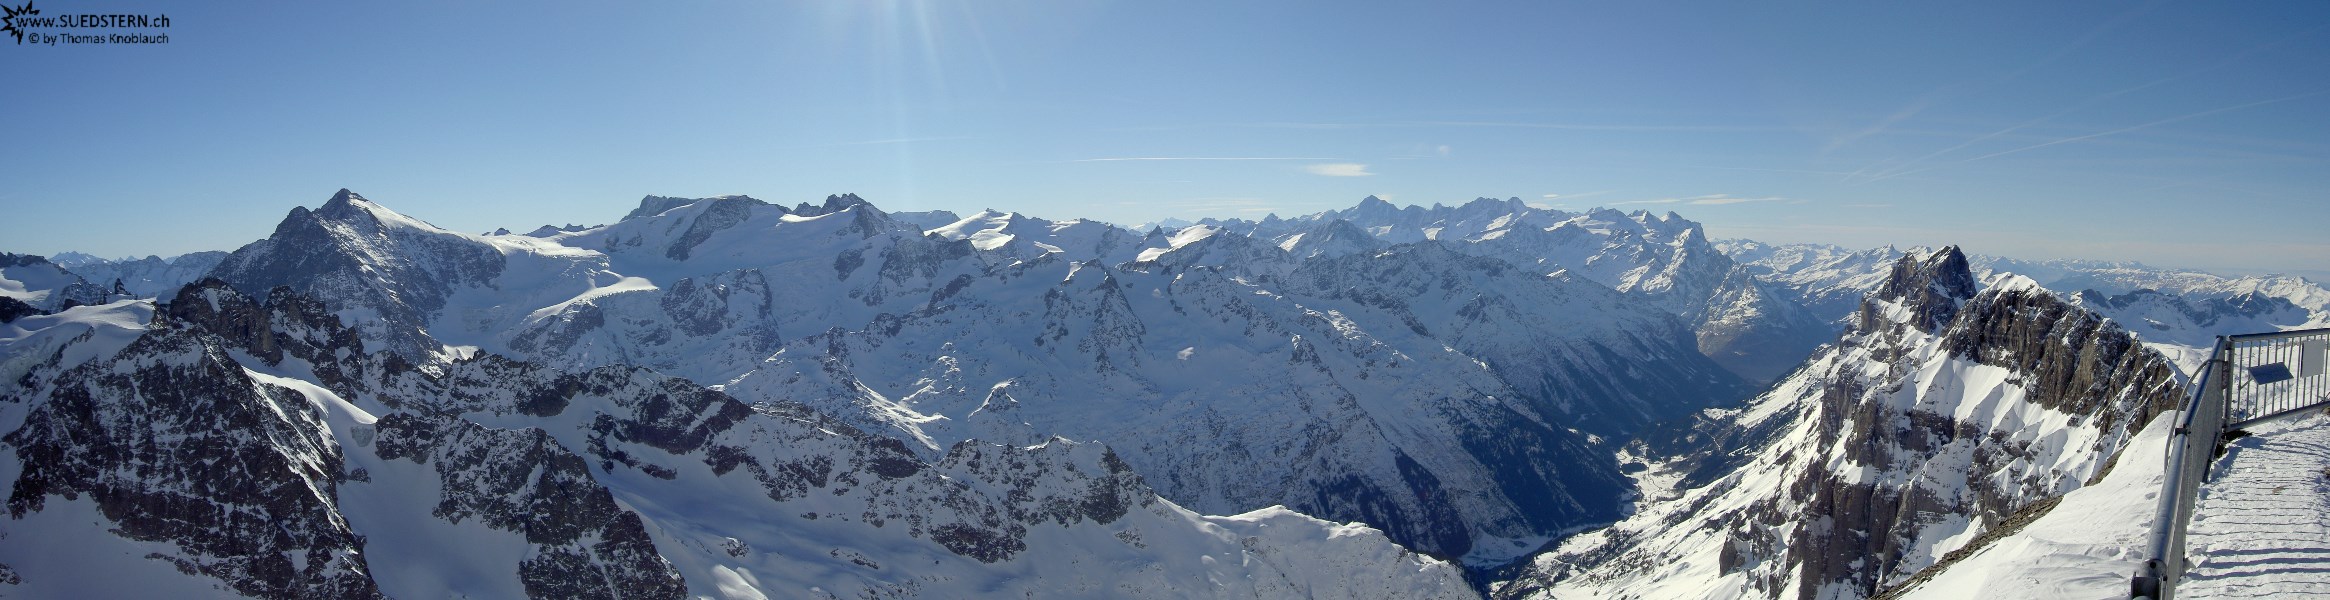 2008-01-29 - Panorama of Bernese Alps seen from Titlis, Switzerland